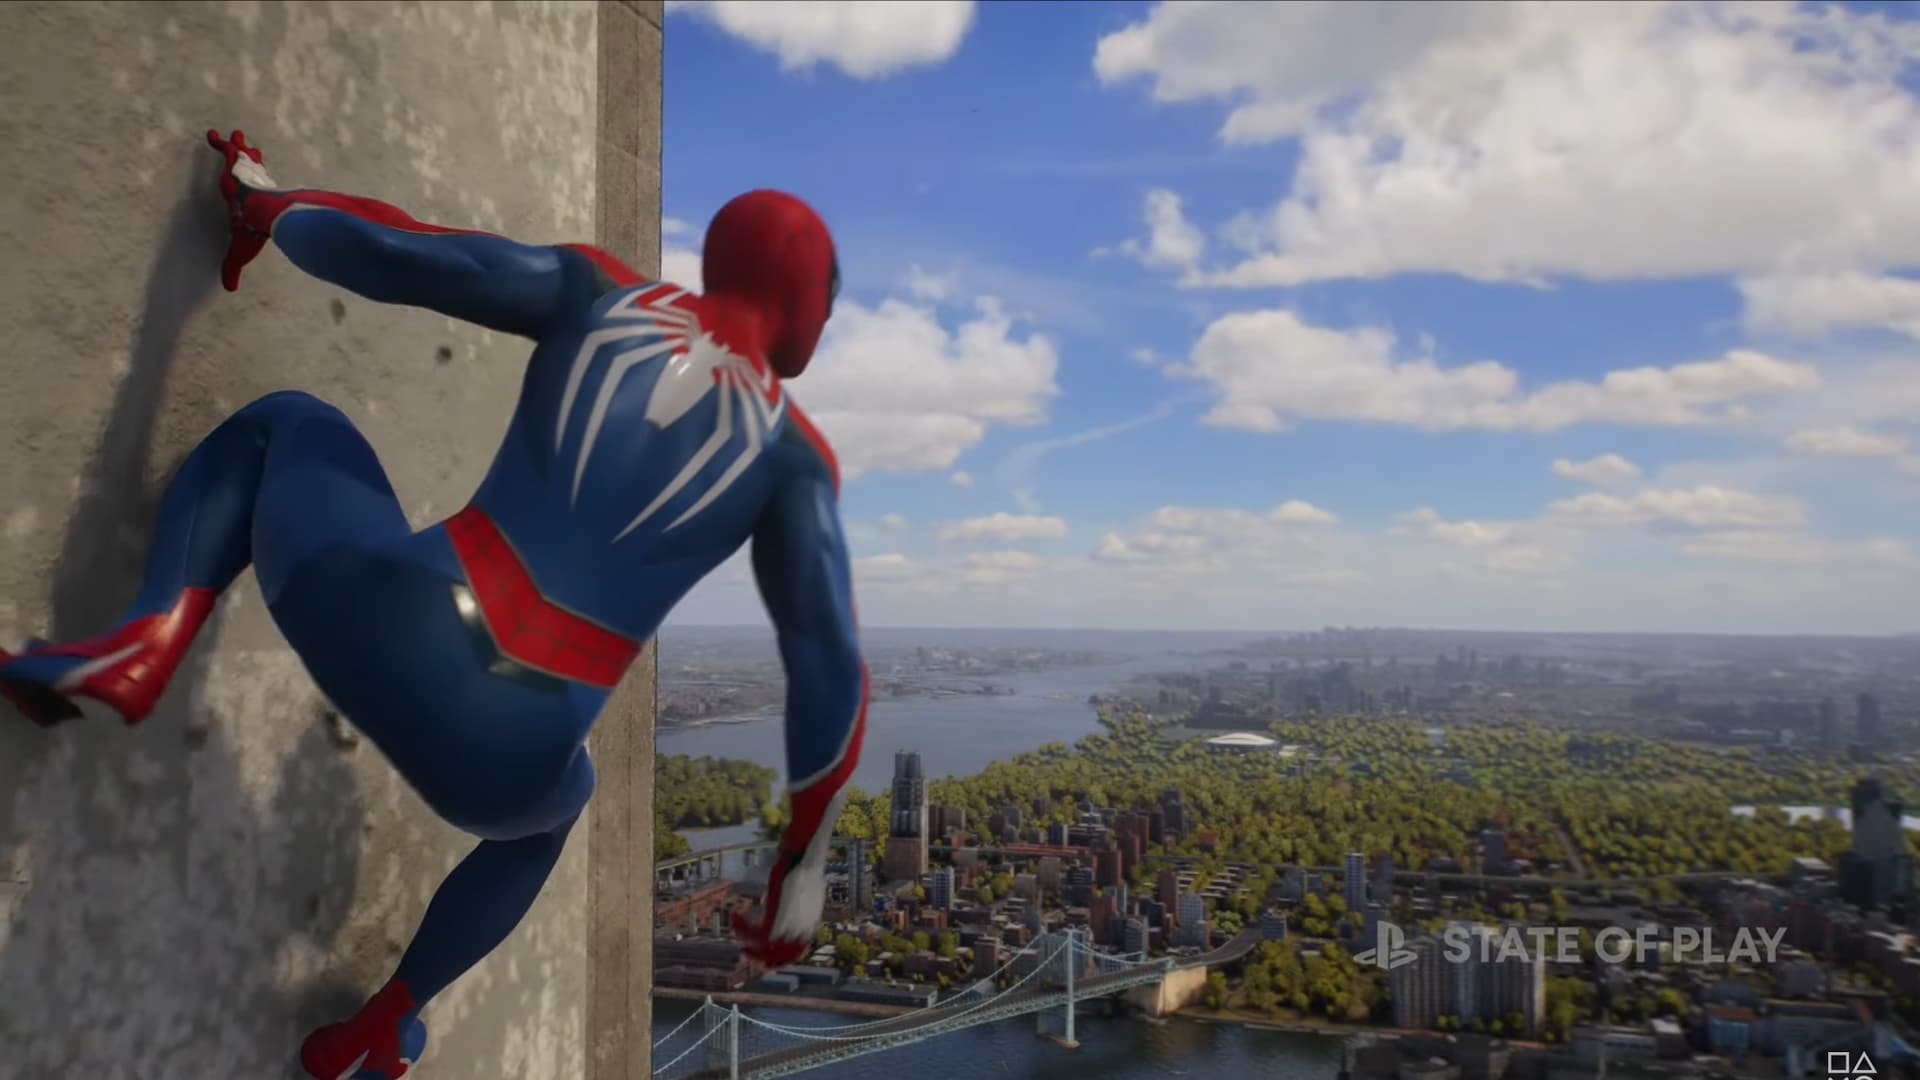 Marvel's Spider-Man 2 Devs Reveal New Open World and Traversal Details